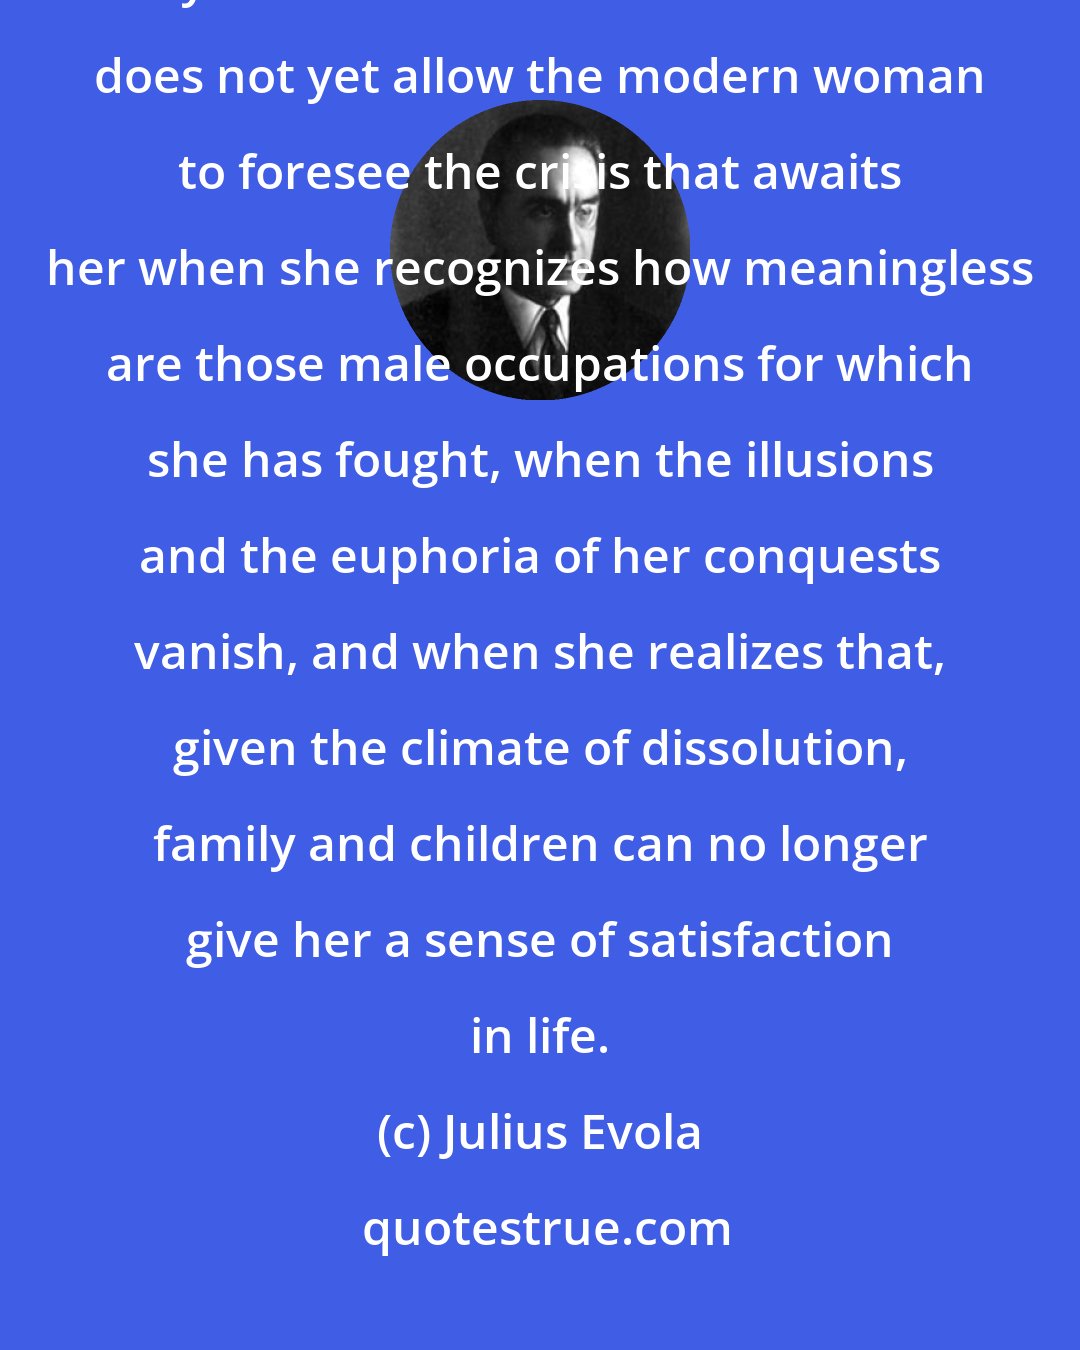 Julius Evola: [T]he regime of diversions, surrogates, and tranquilizers that pass for today's 'distractions' and 'amusements' does not yet allow the modern woman to foresee the crisis that awaits her when she recognizes how meaningless are those male occupations for which she has fought, when the illusions and the euphoria of her conquests vanish, and when she realizes that, given the climate of dissolution, family and children can no longer give her a sense of satisfaction in life.